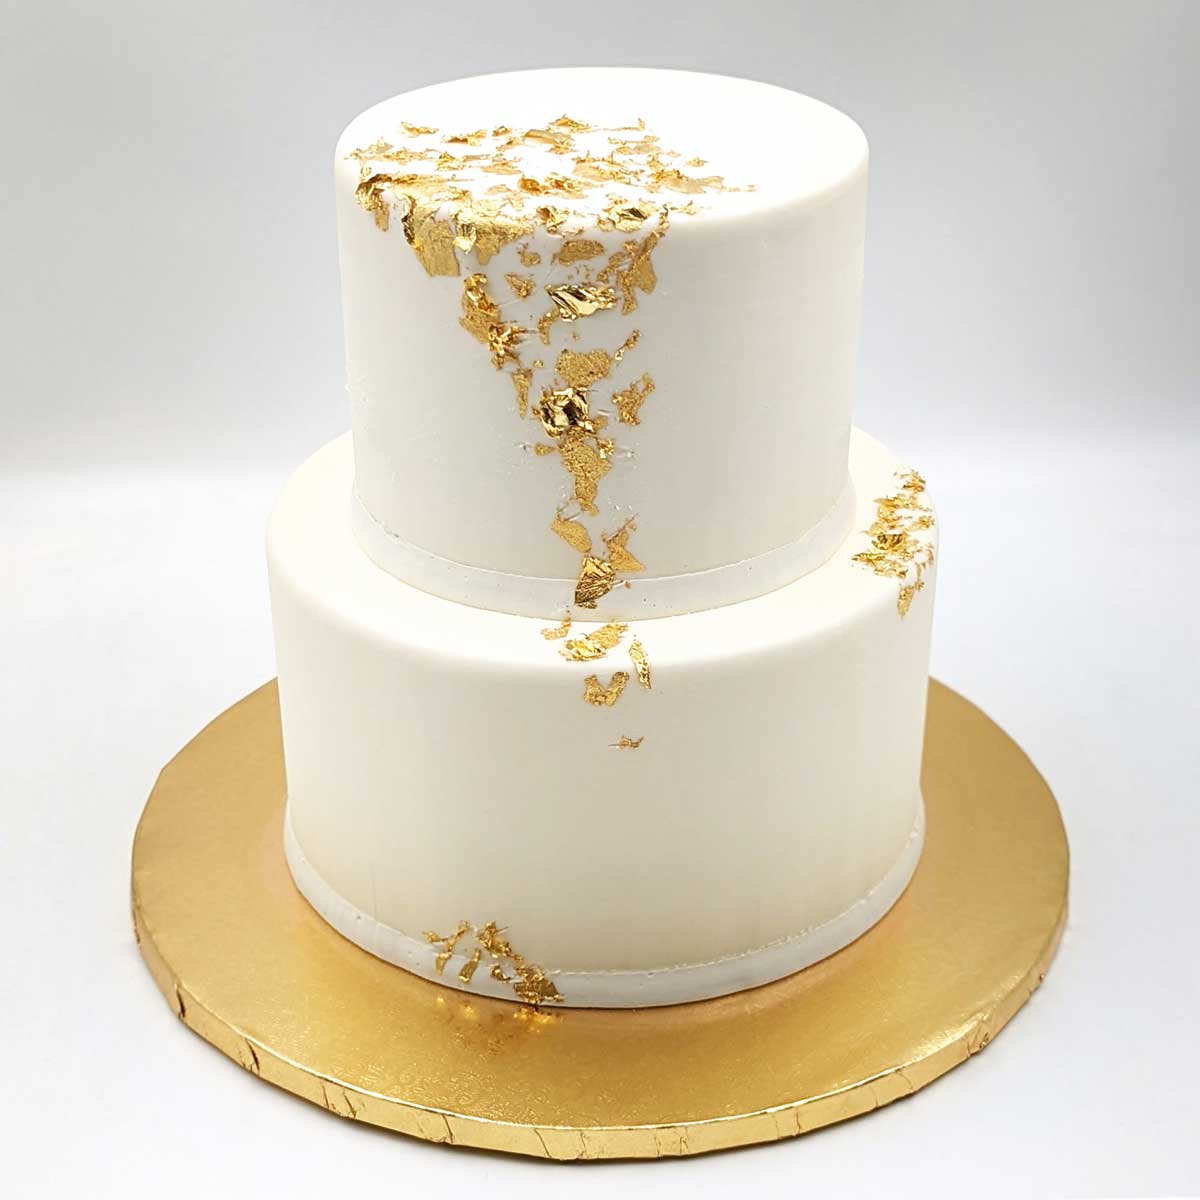 Simple Gold Leaf: Build Your Own Cake